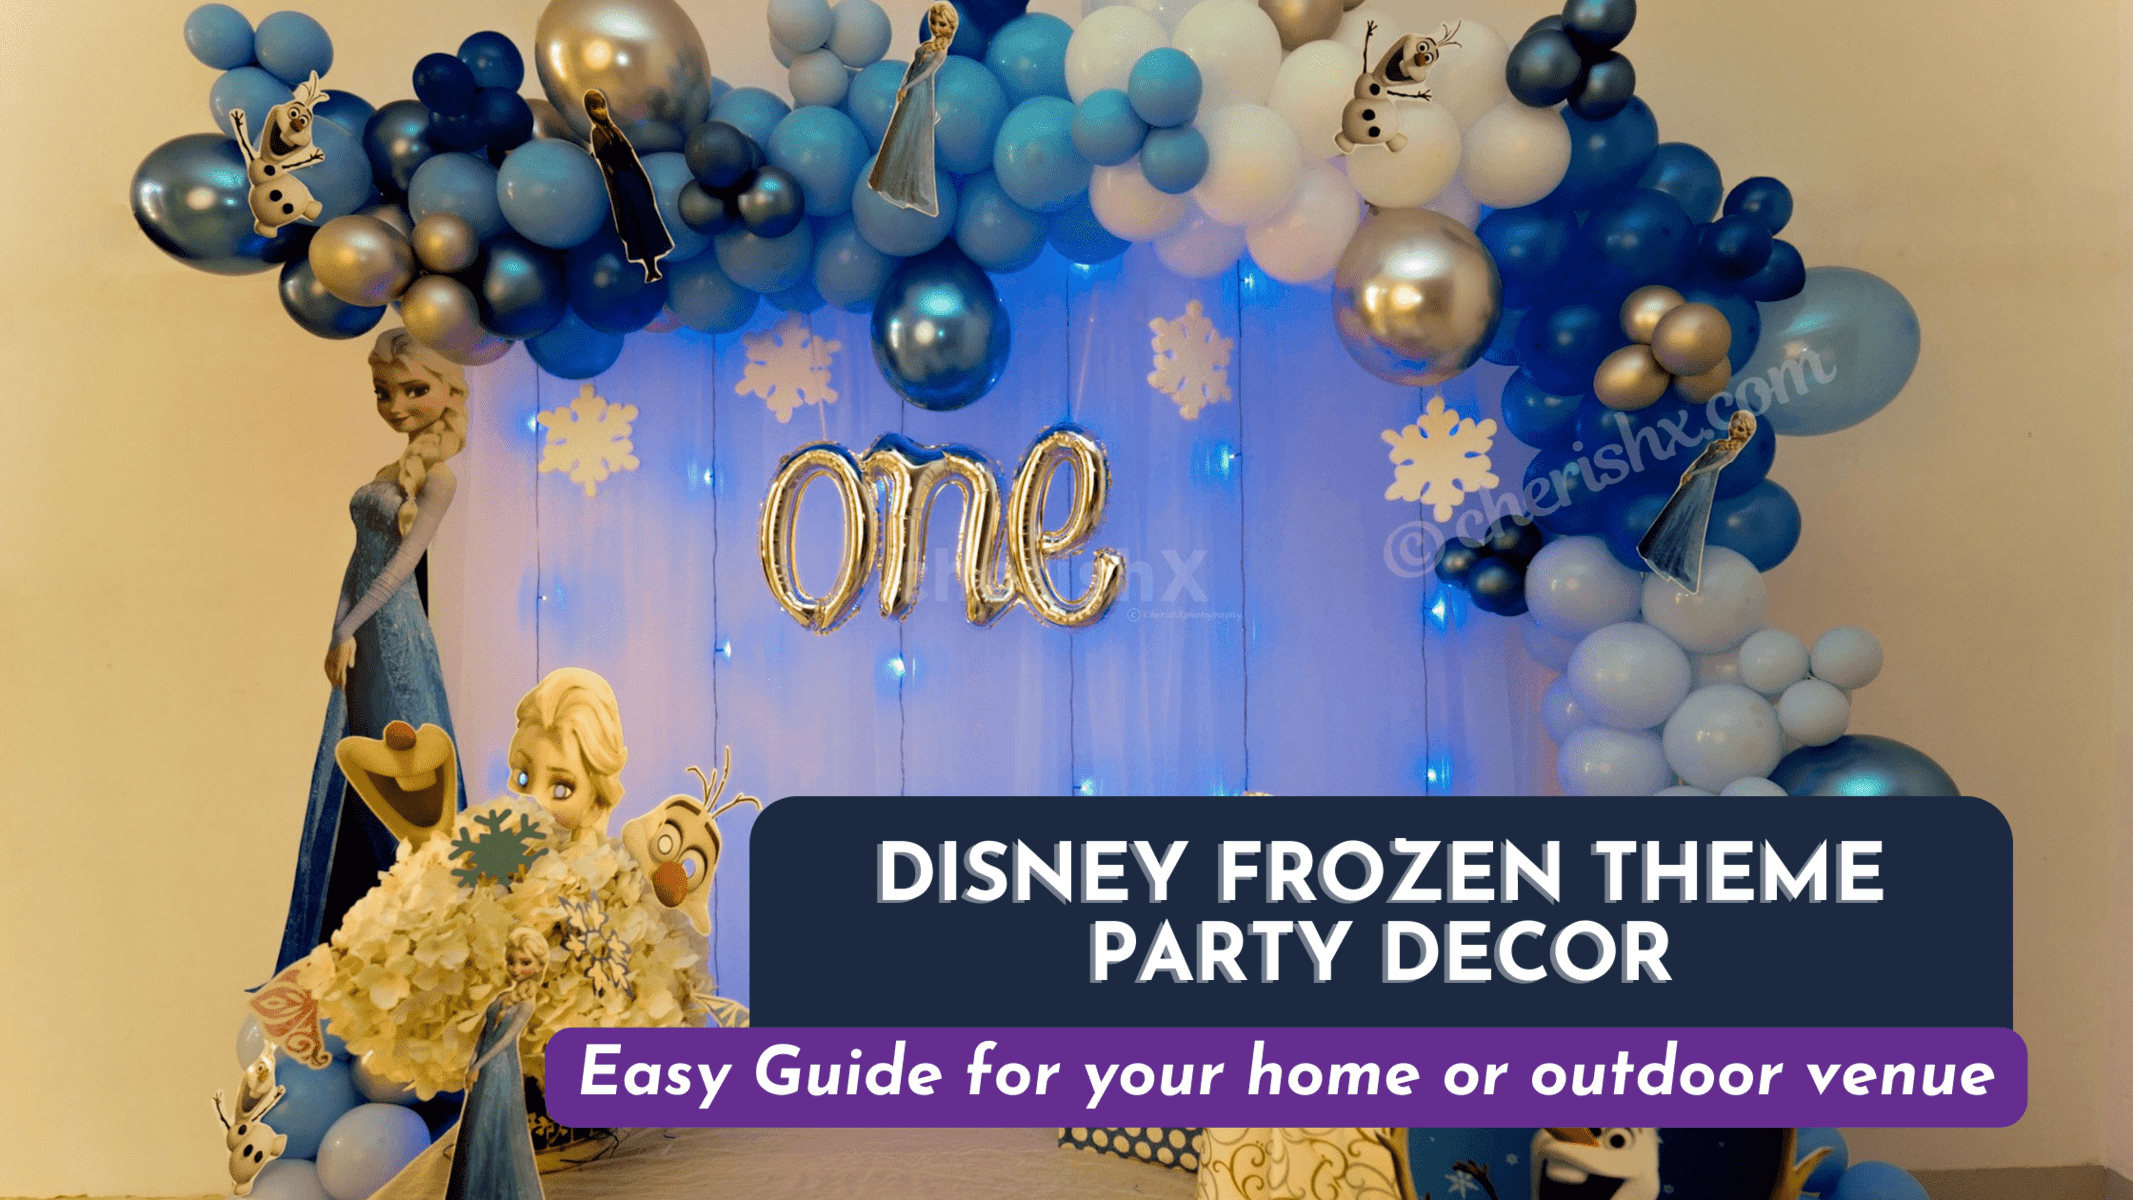 Disney Frozen Theme Party Ideas- Easy Guide for your home or outdoor venue